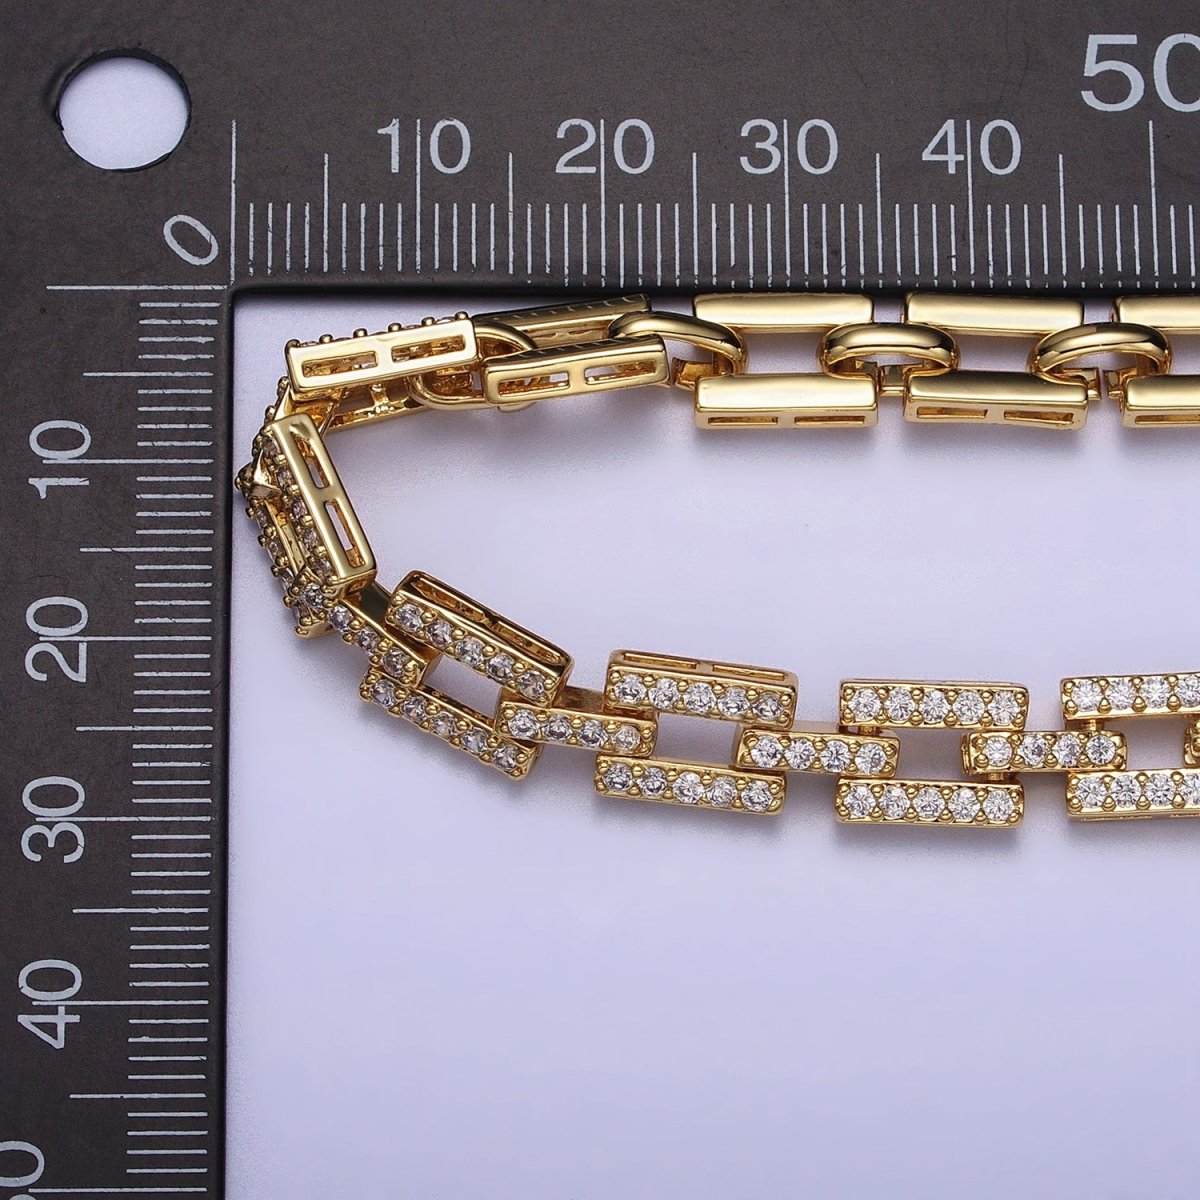 24K Gold Filled 7.5mm Half Micro Paved CZ Boxy Paperclip Link 17 Inch Chain Necklace | WA-1611 WA-1612 Clearance Pricing - DLUXCA